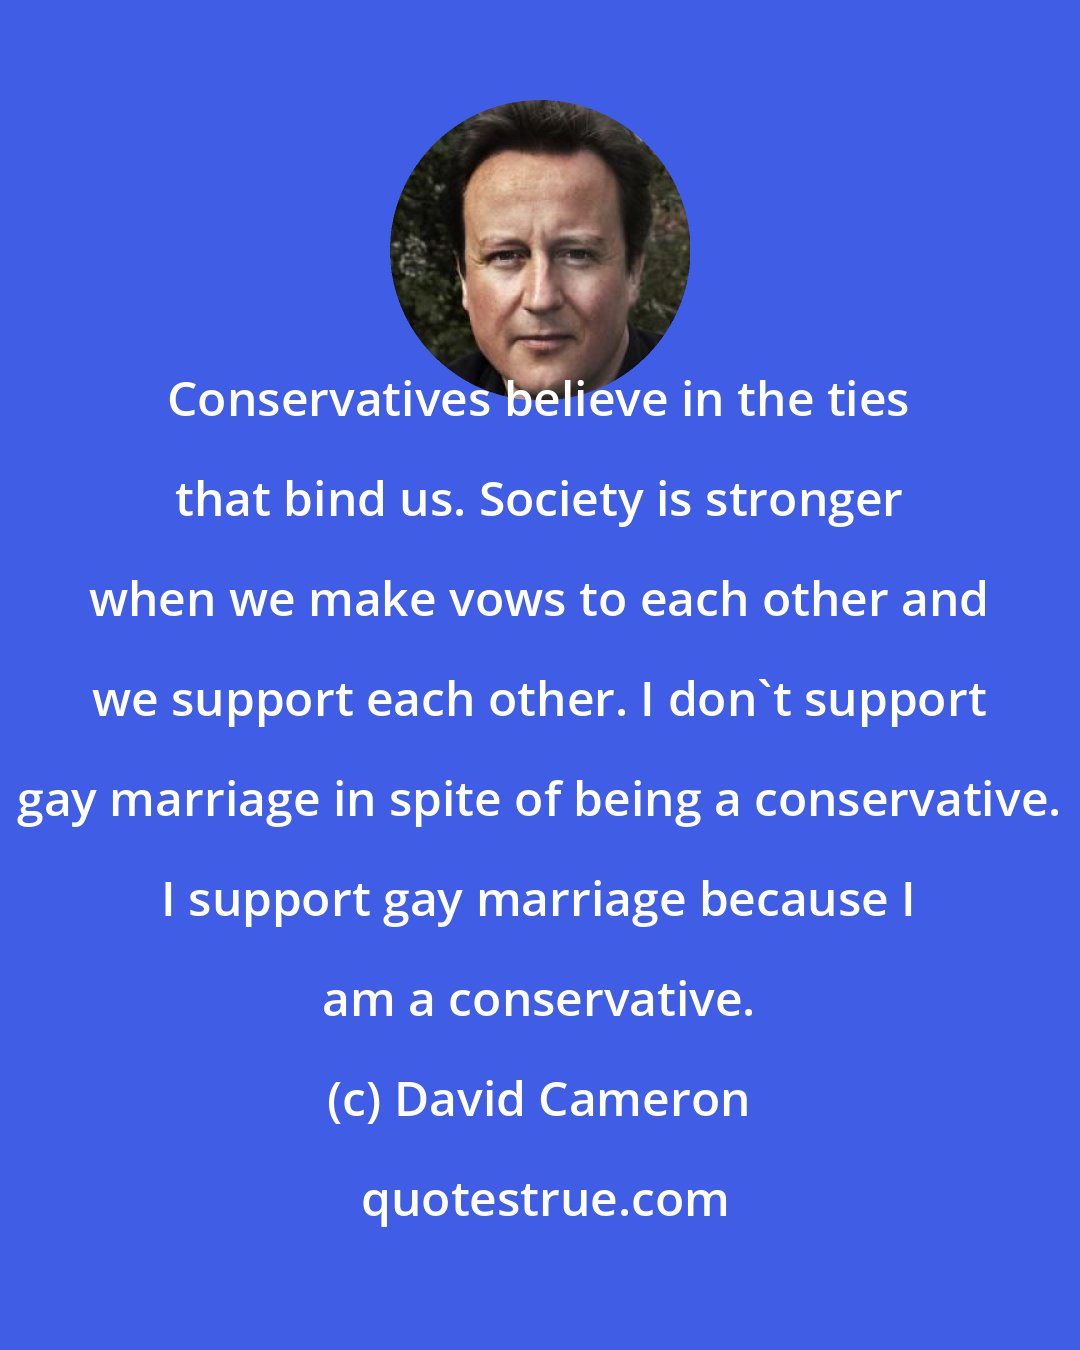 David Cameron: Conservatives believe in the ties that bind us. Society is stronger when we make vows to each other and we support each other. I don't support gay marriage in spite of being a conservative. I support gay marriage because I am a conservative.